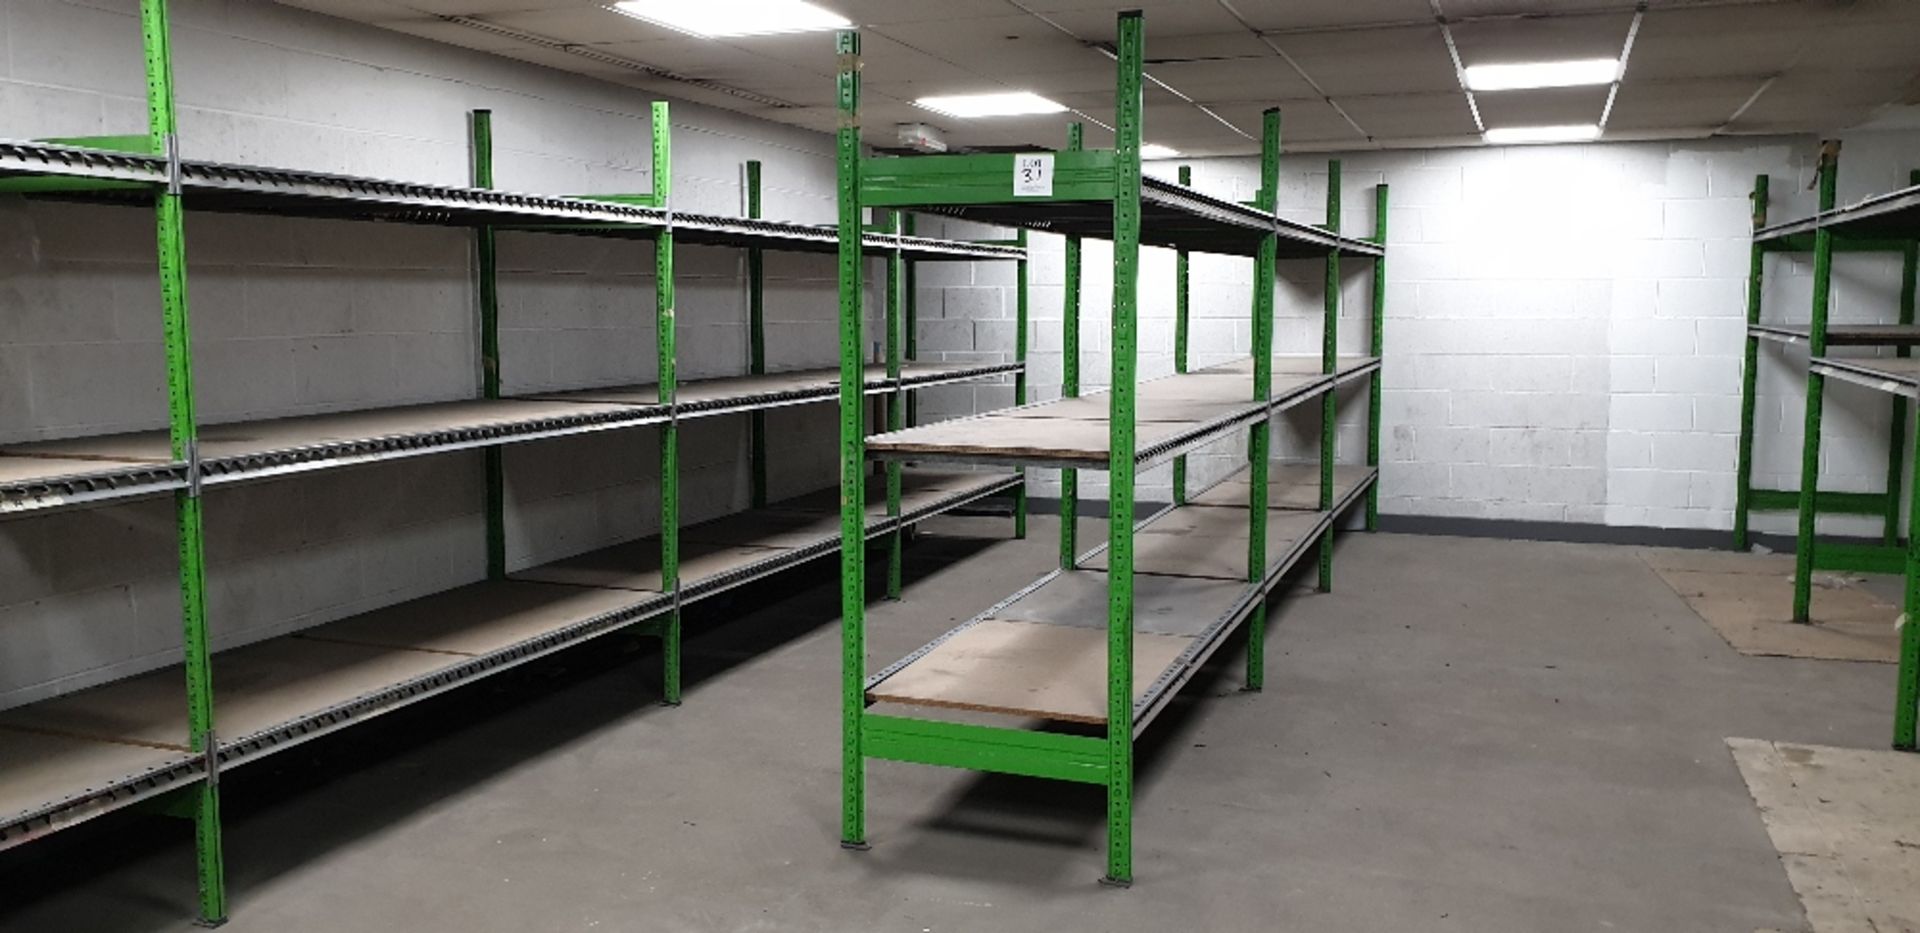 13 - bays of adjustable boltless shelving (bay size 2000m x 800m x 2200mm high) - Image 2 of 4